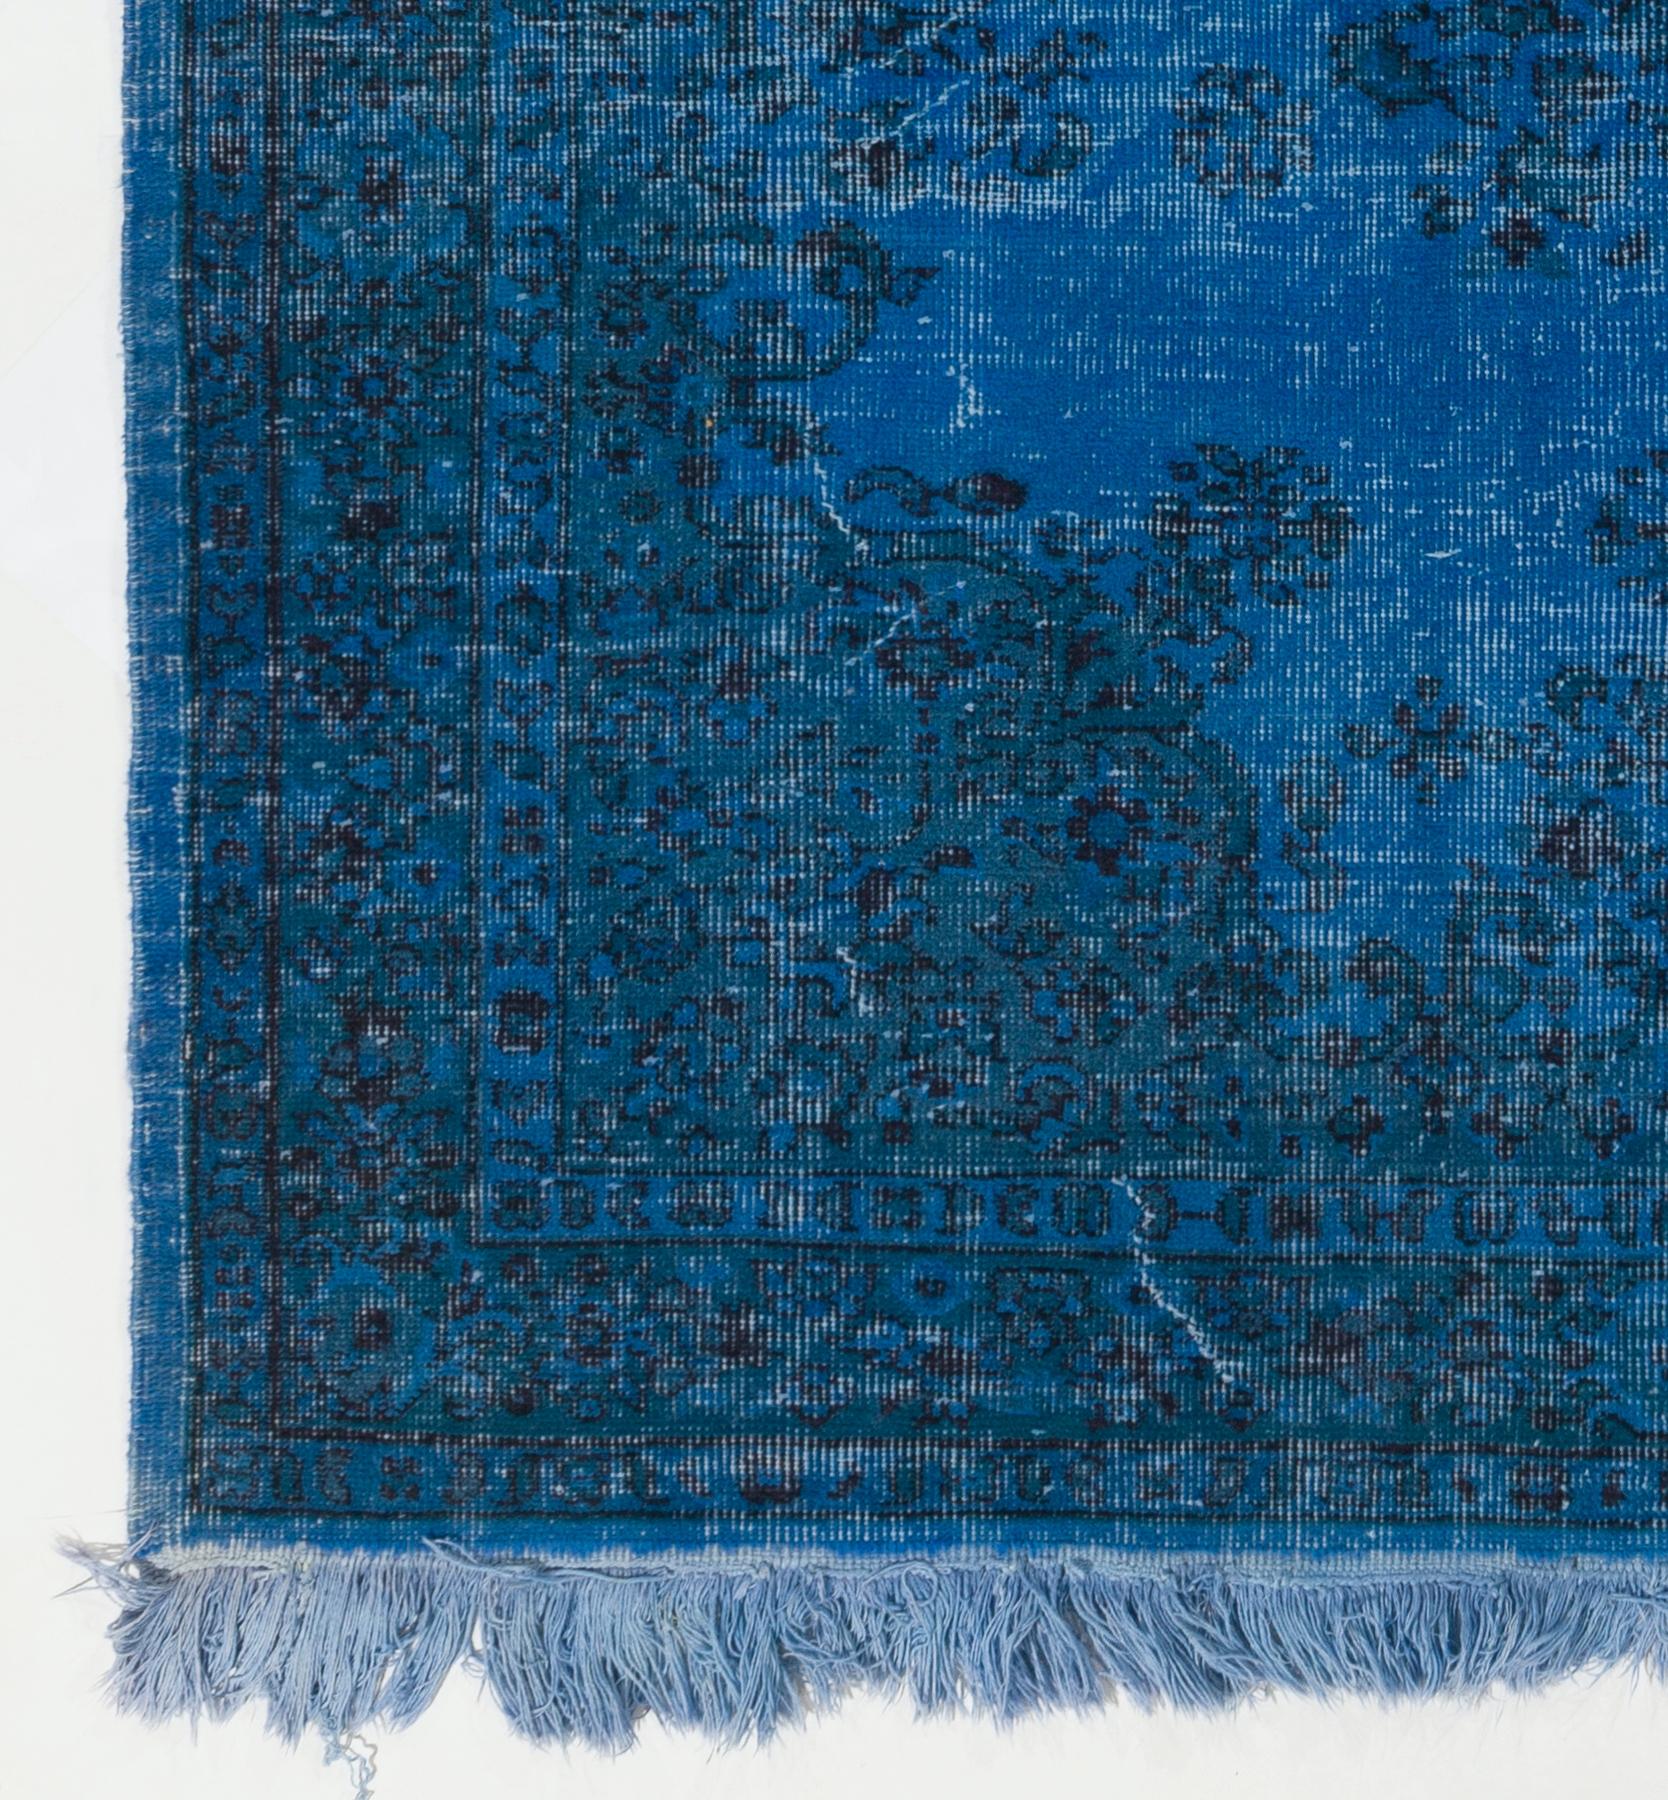 Hand-Woven 5.4x8.6 Ft Vintage Rug Over-Dyed in Blue Color, Ideal for Contemporary Interiors